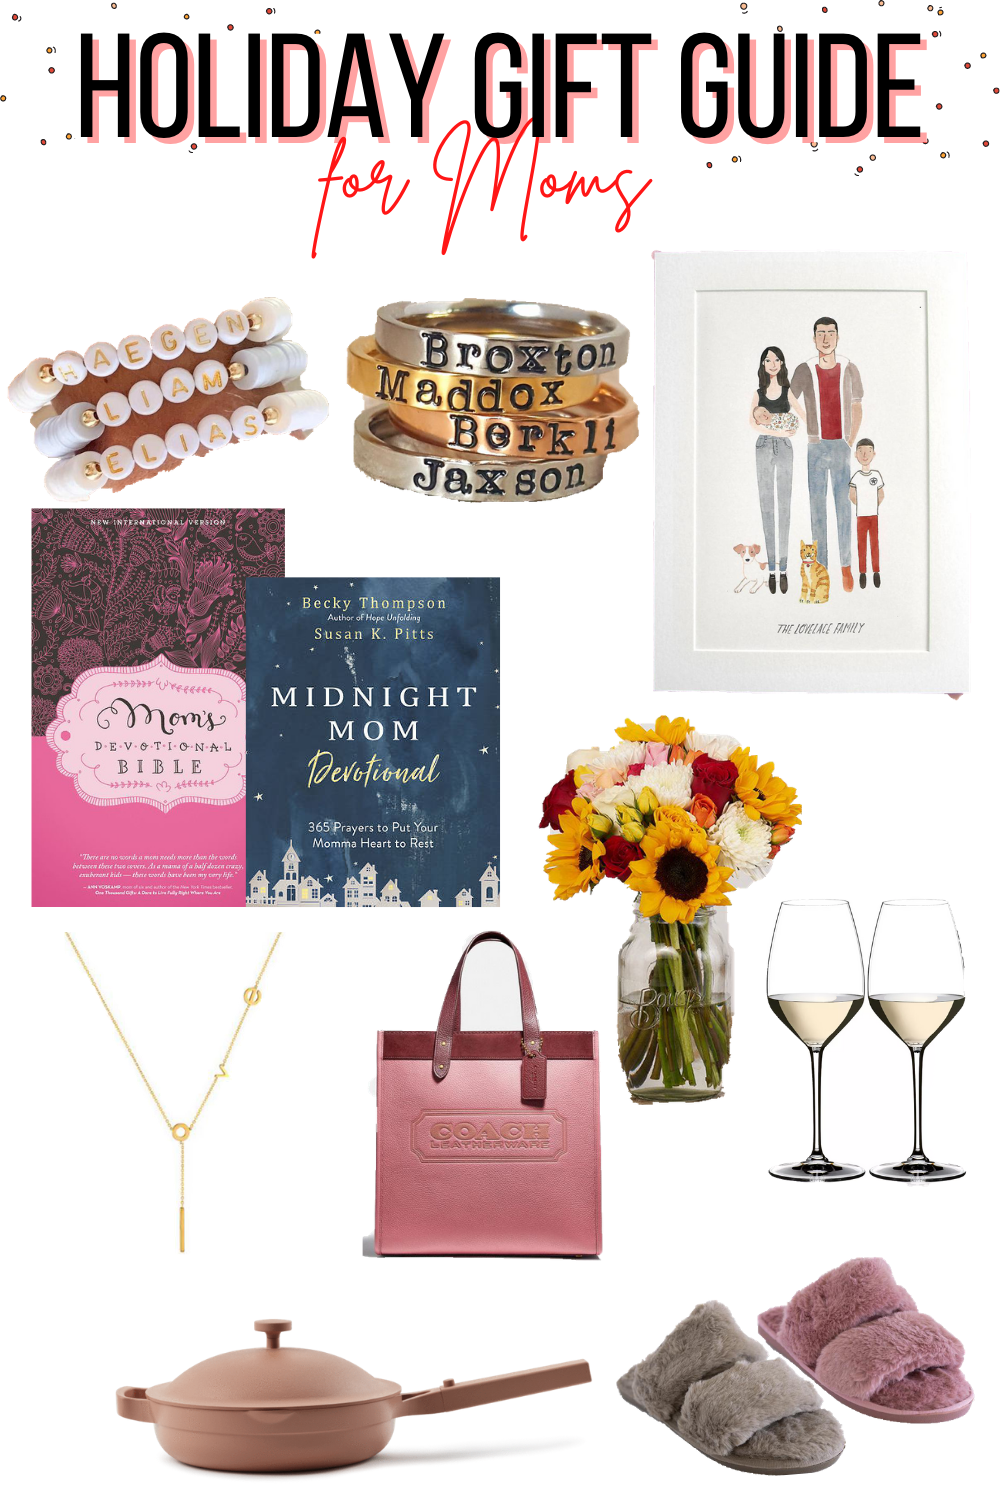 Holiday Gift Guide: For Mom - Classy Yet Trendy  Christmas presents for  moms, Mom holiday gift, Mom gift guide